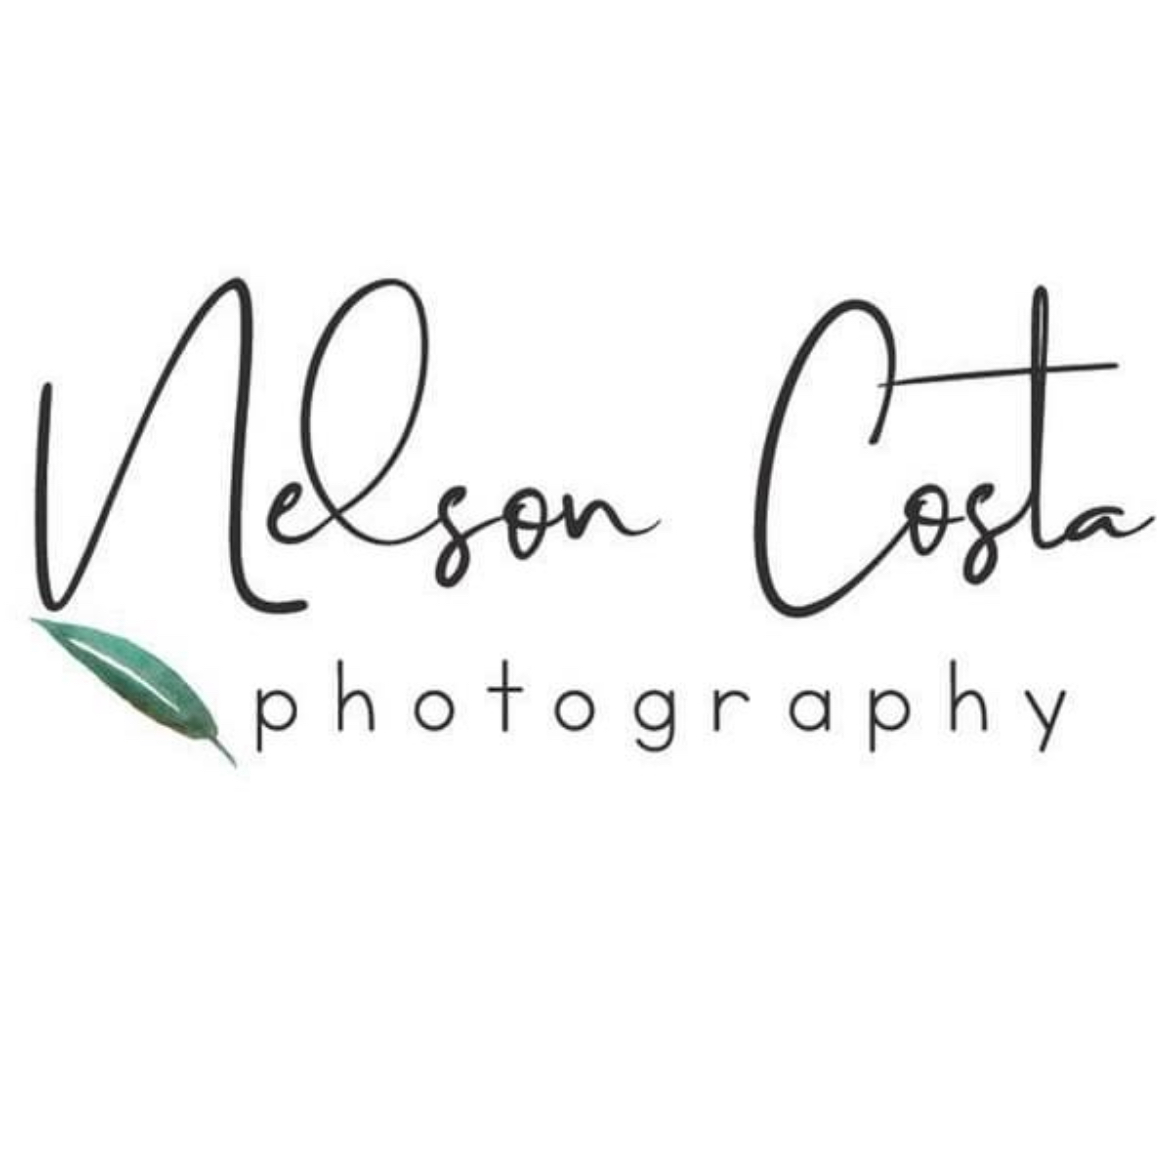 Nelson Costa Photography